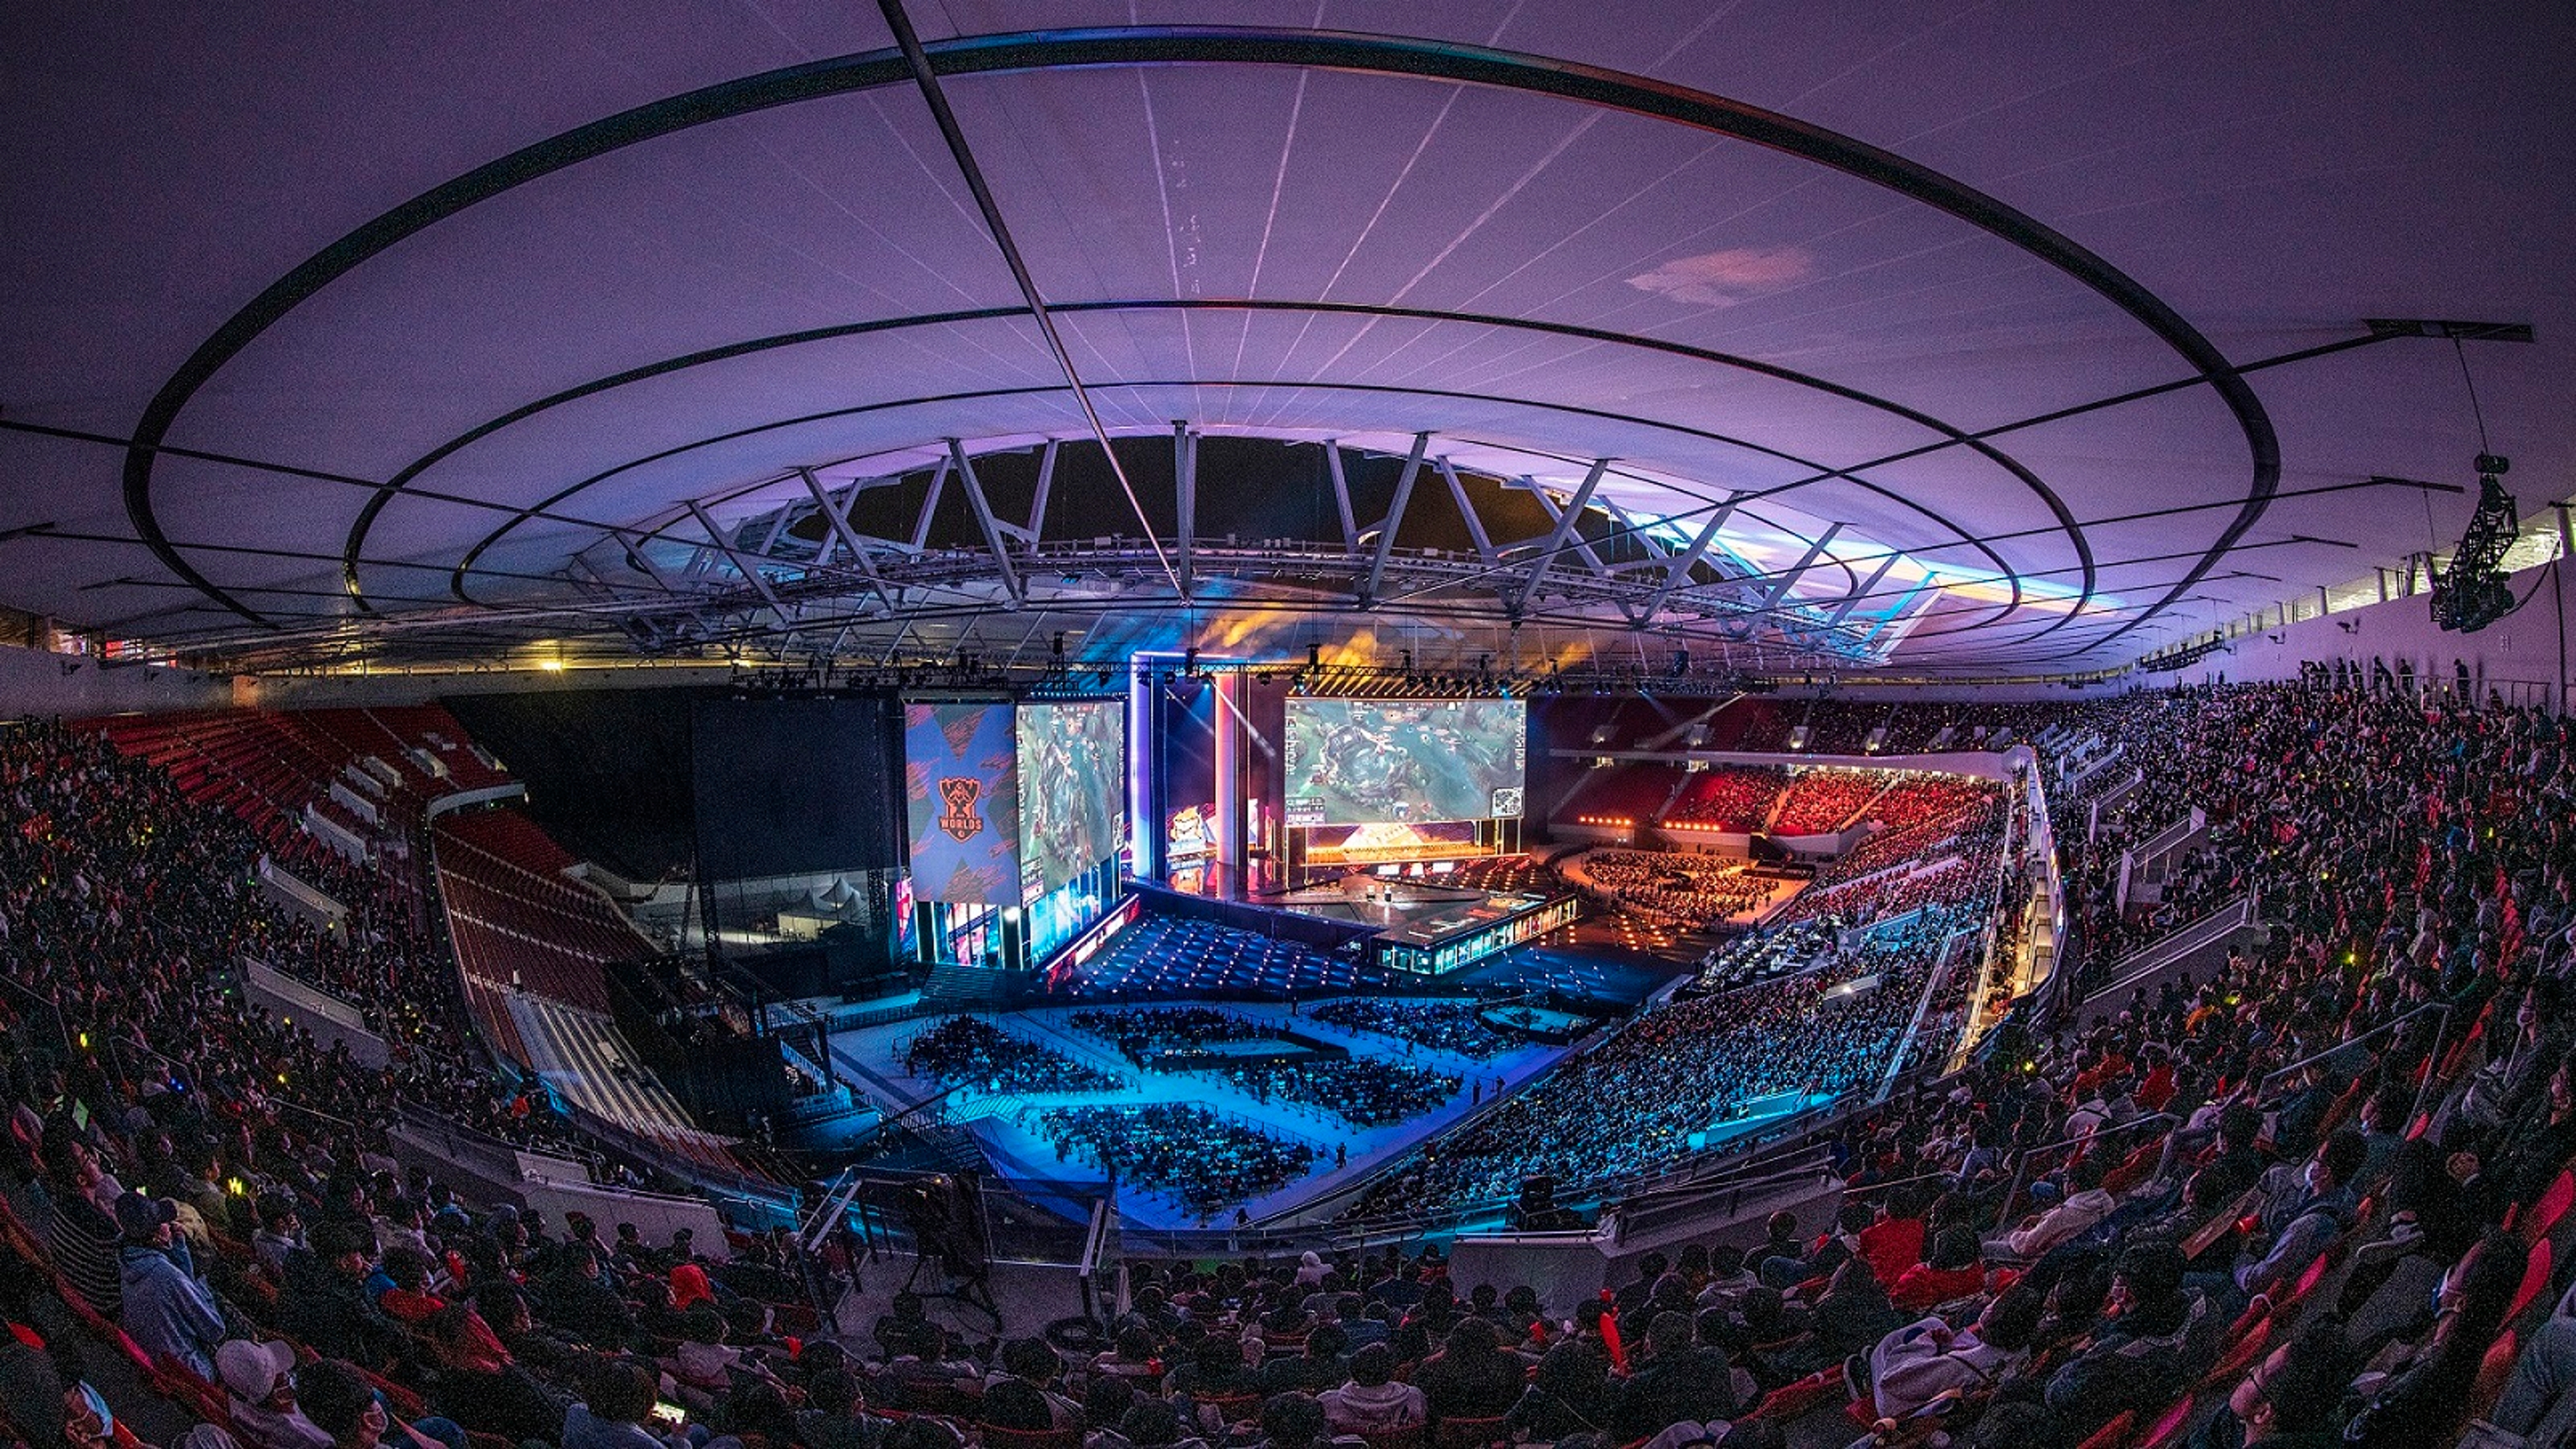 League of Legends global viewership in 2023, before Worlds